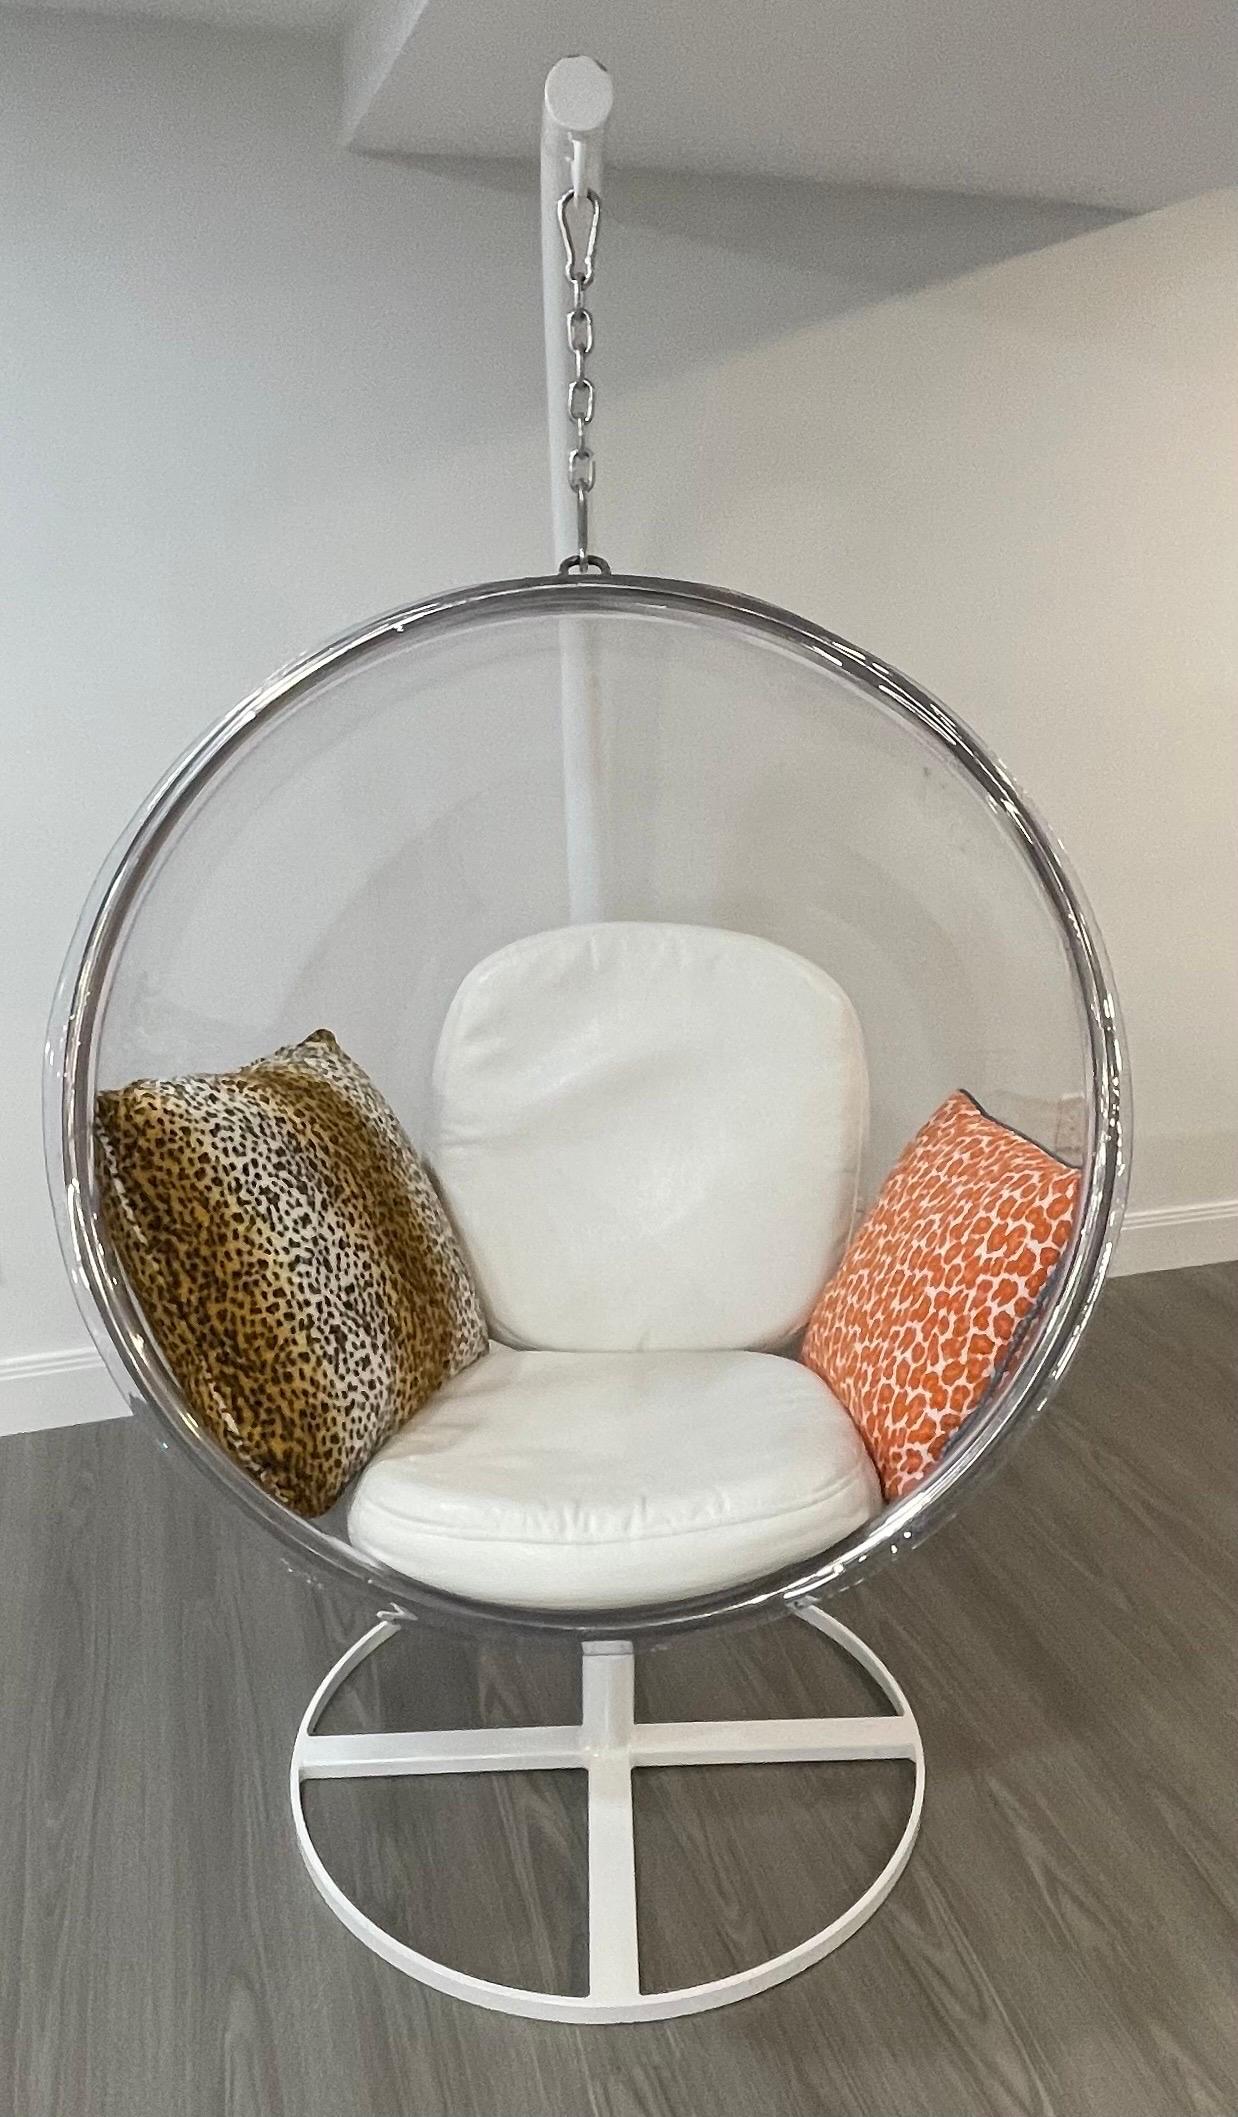 A wonderful vintage Eero Aarnio style suspended Lucite / Acrylic bubble chair with white powder coated stand, accompanied by seat and back white faux leather cushions and two animal print decorative cushions
Measures: 75” H x 41” W x 28” D.